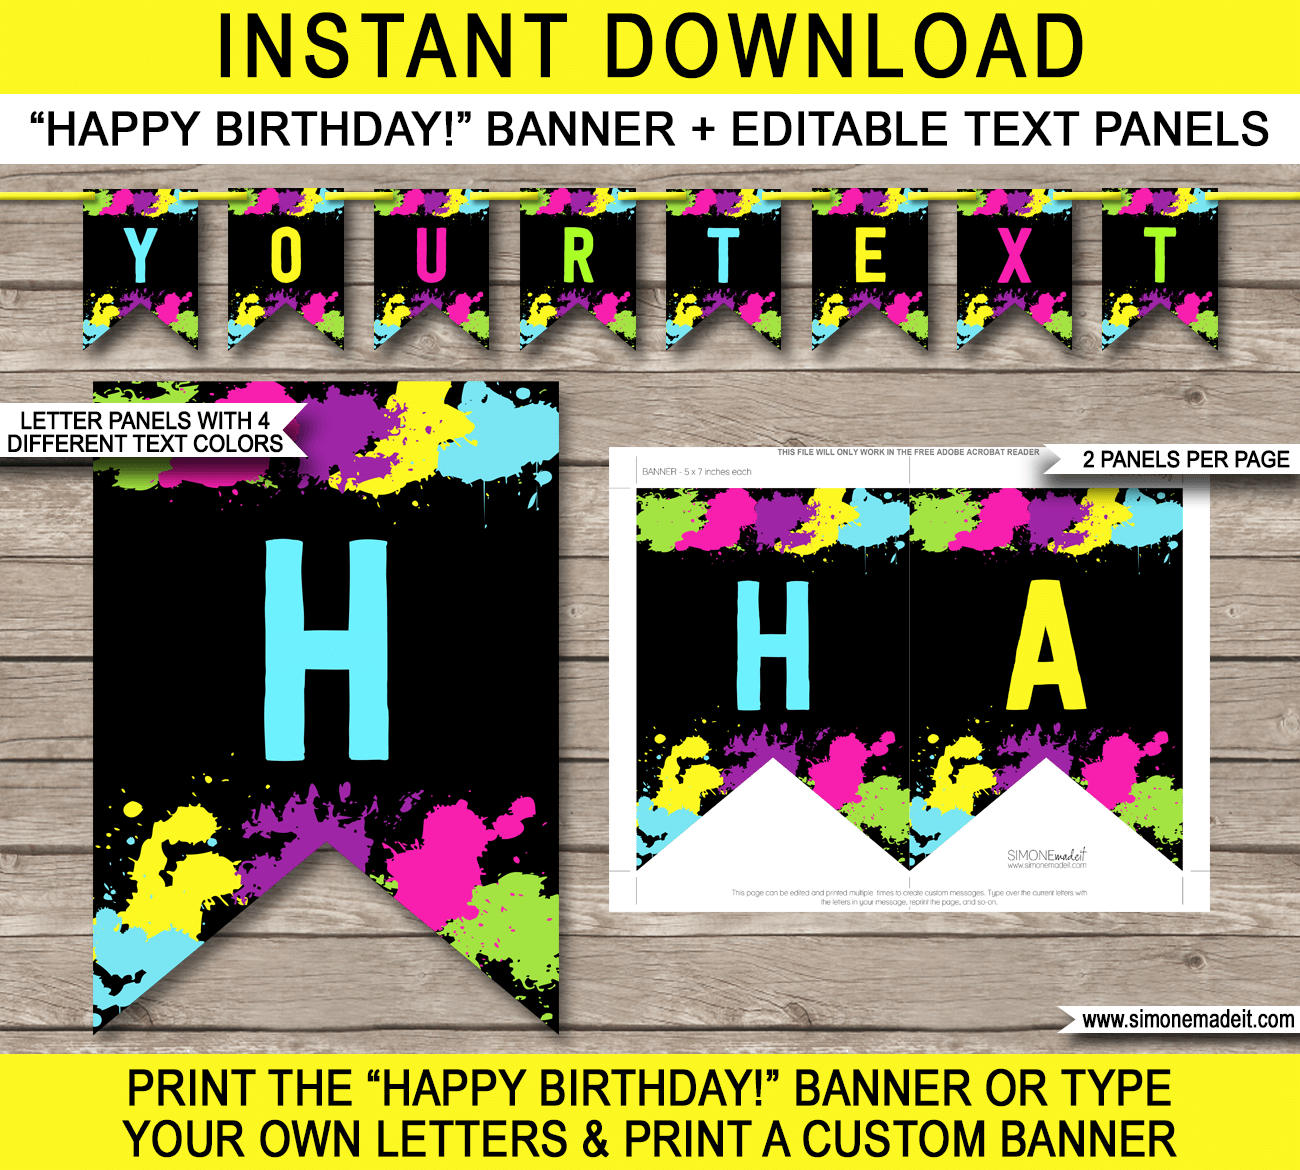 Neon Glow Party Pennant Banner Template - Neon Glow Bunting - Happy Birthday Banner - Birthday Party - Editable and Printable DIY Template - INSTANT DOWNLOAD $4.50 via simonemadeit.com